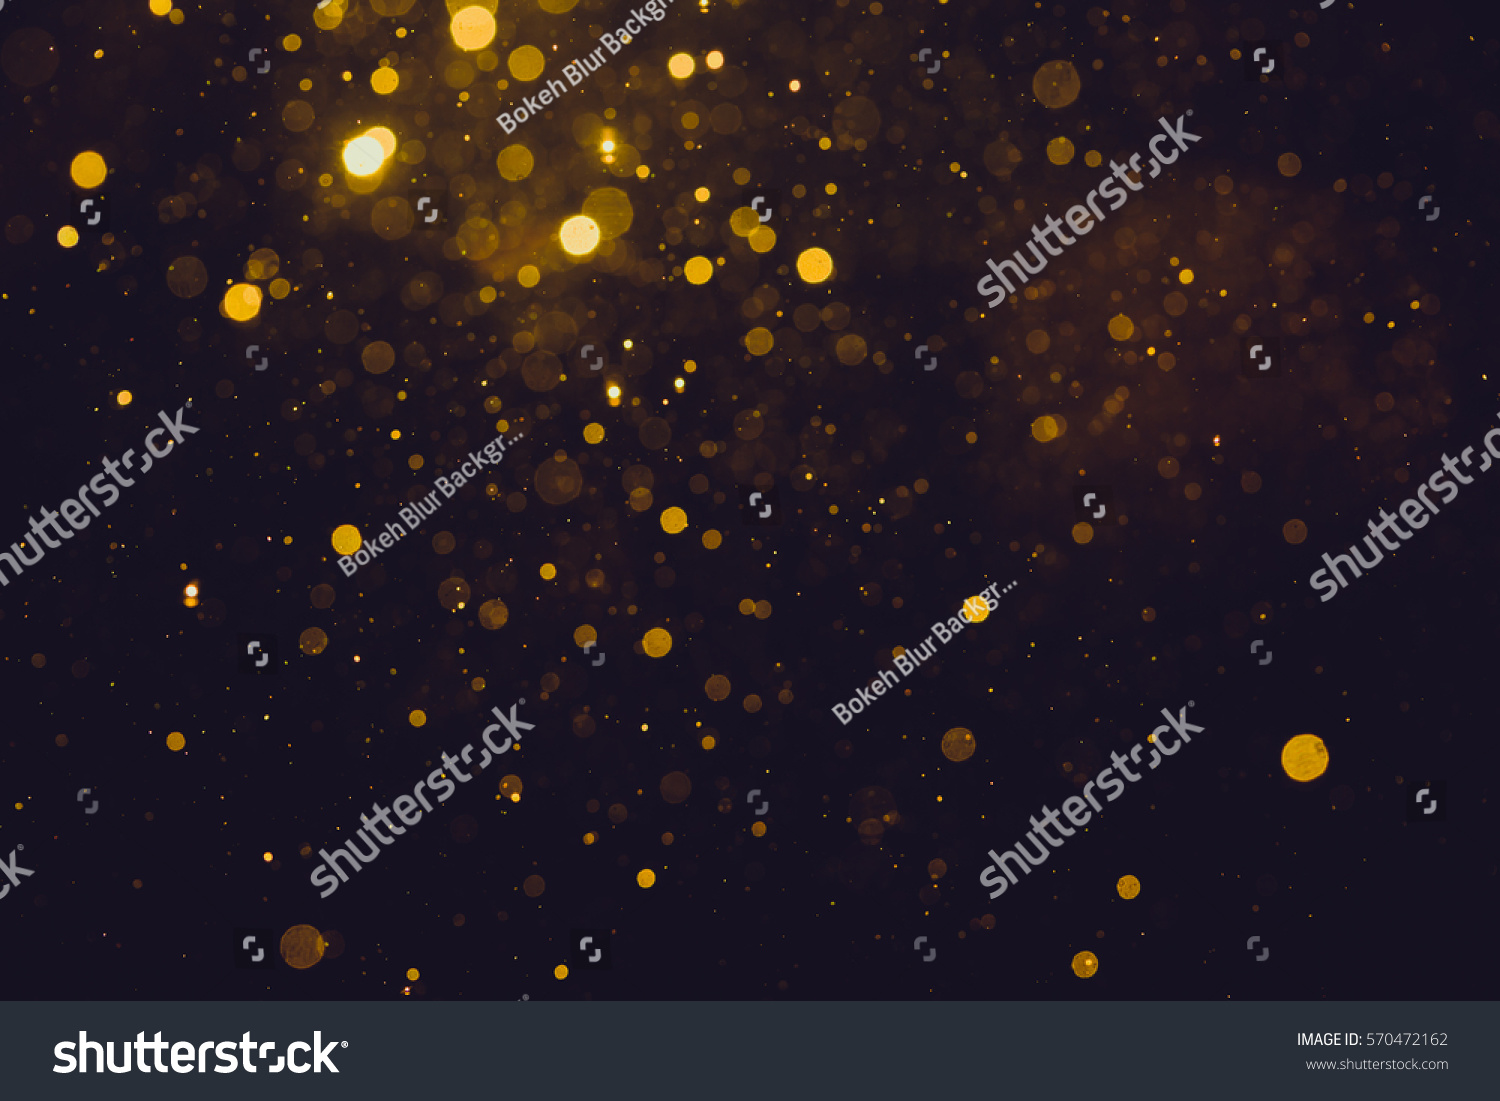 Gold abstract bokeh background #570472162